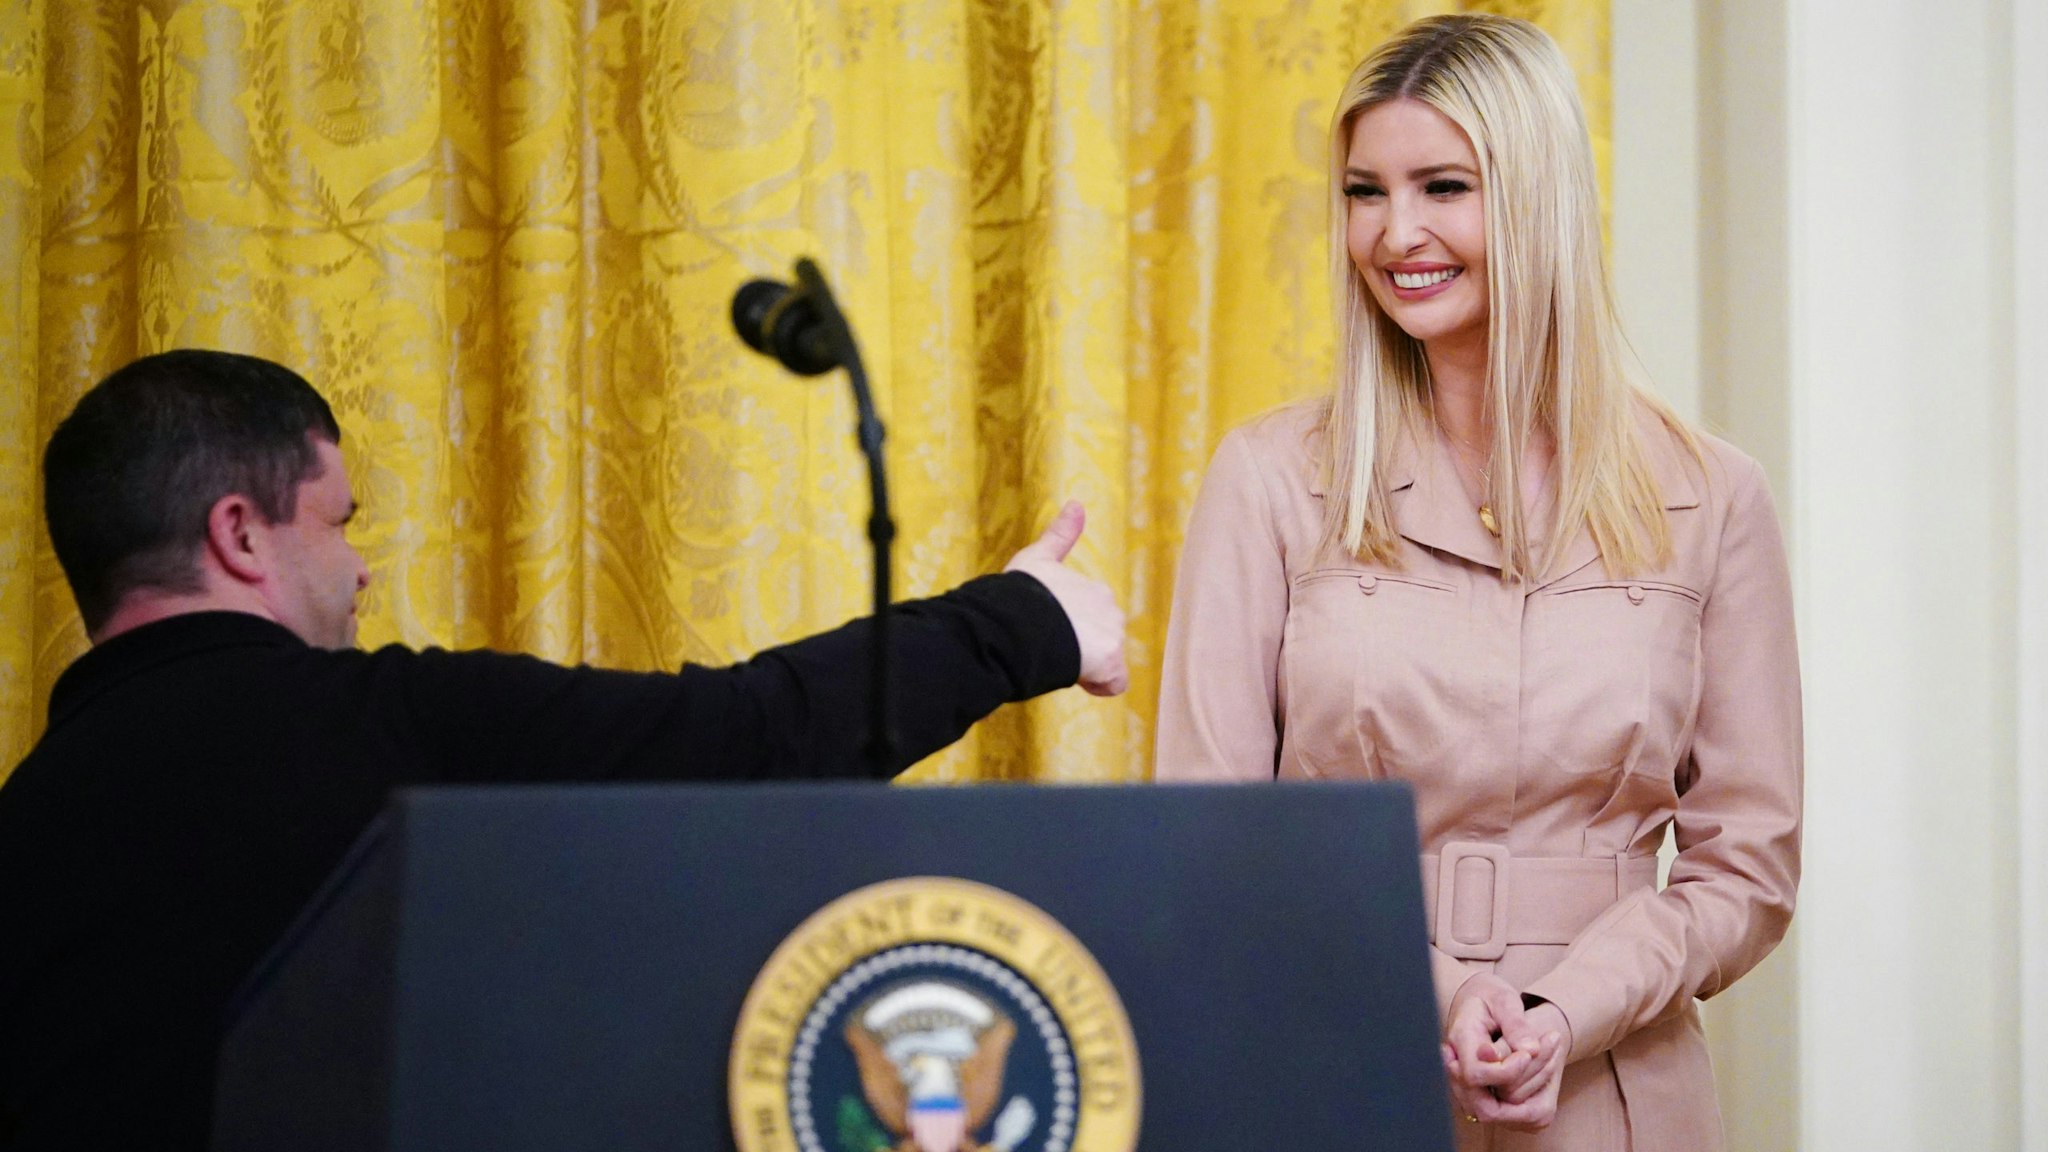 Bitty &amp; Beau's Coffee employee Michael Heup (L) gives the thumbs-up as White House Advisor Ivanka Trump watches during a press briefing in the East Room of the White House in Washington, DC, on April 28, 2020. - US President Donald Trump held a press briefing about supporting small businesses during the coronavirus pandemic through the Paycheck Protection Program.